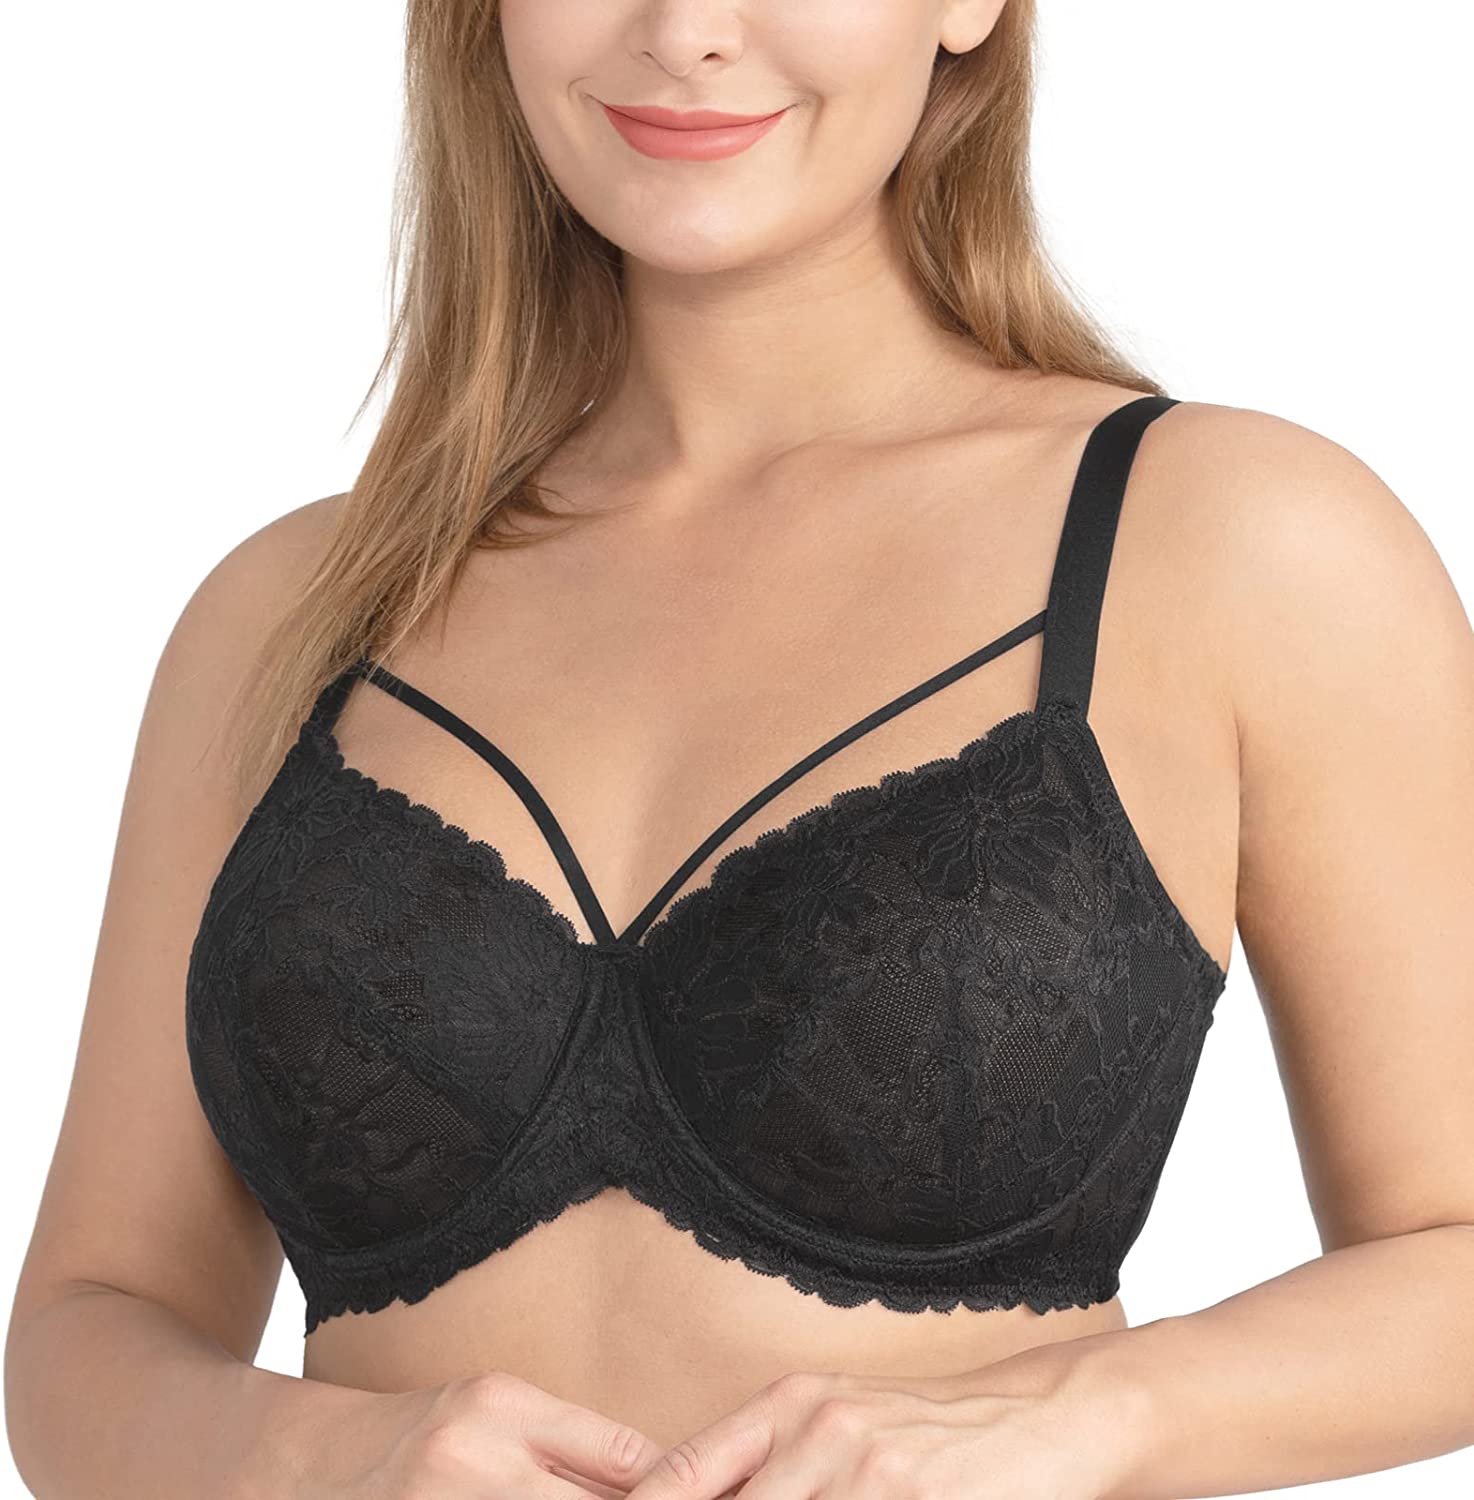  Minimizer Bra For Women,Unlined Non Padded Lace Sexy Plus  Size Bras Full Figure Black Bras